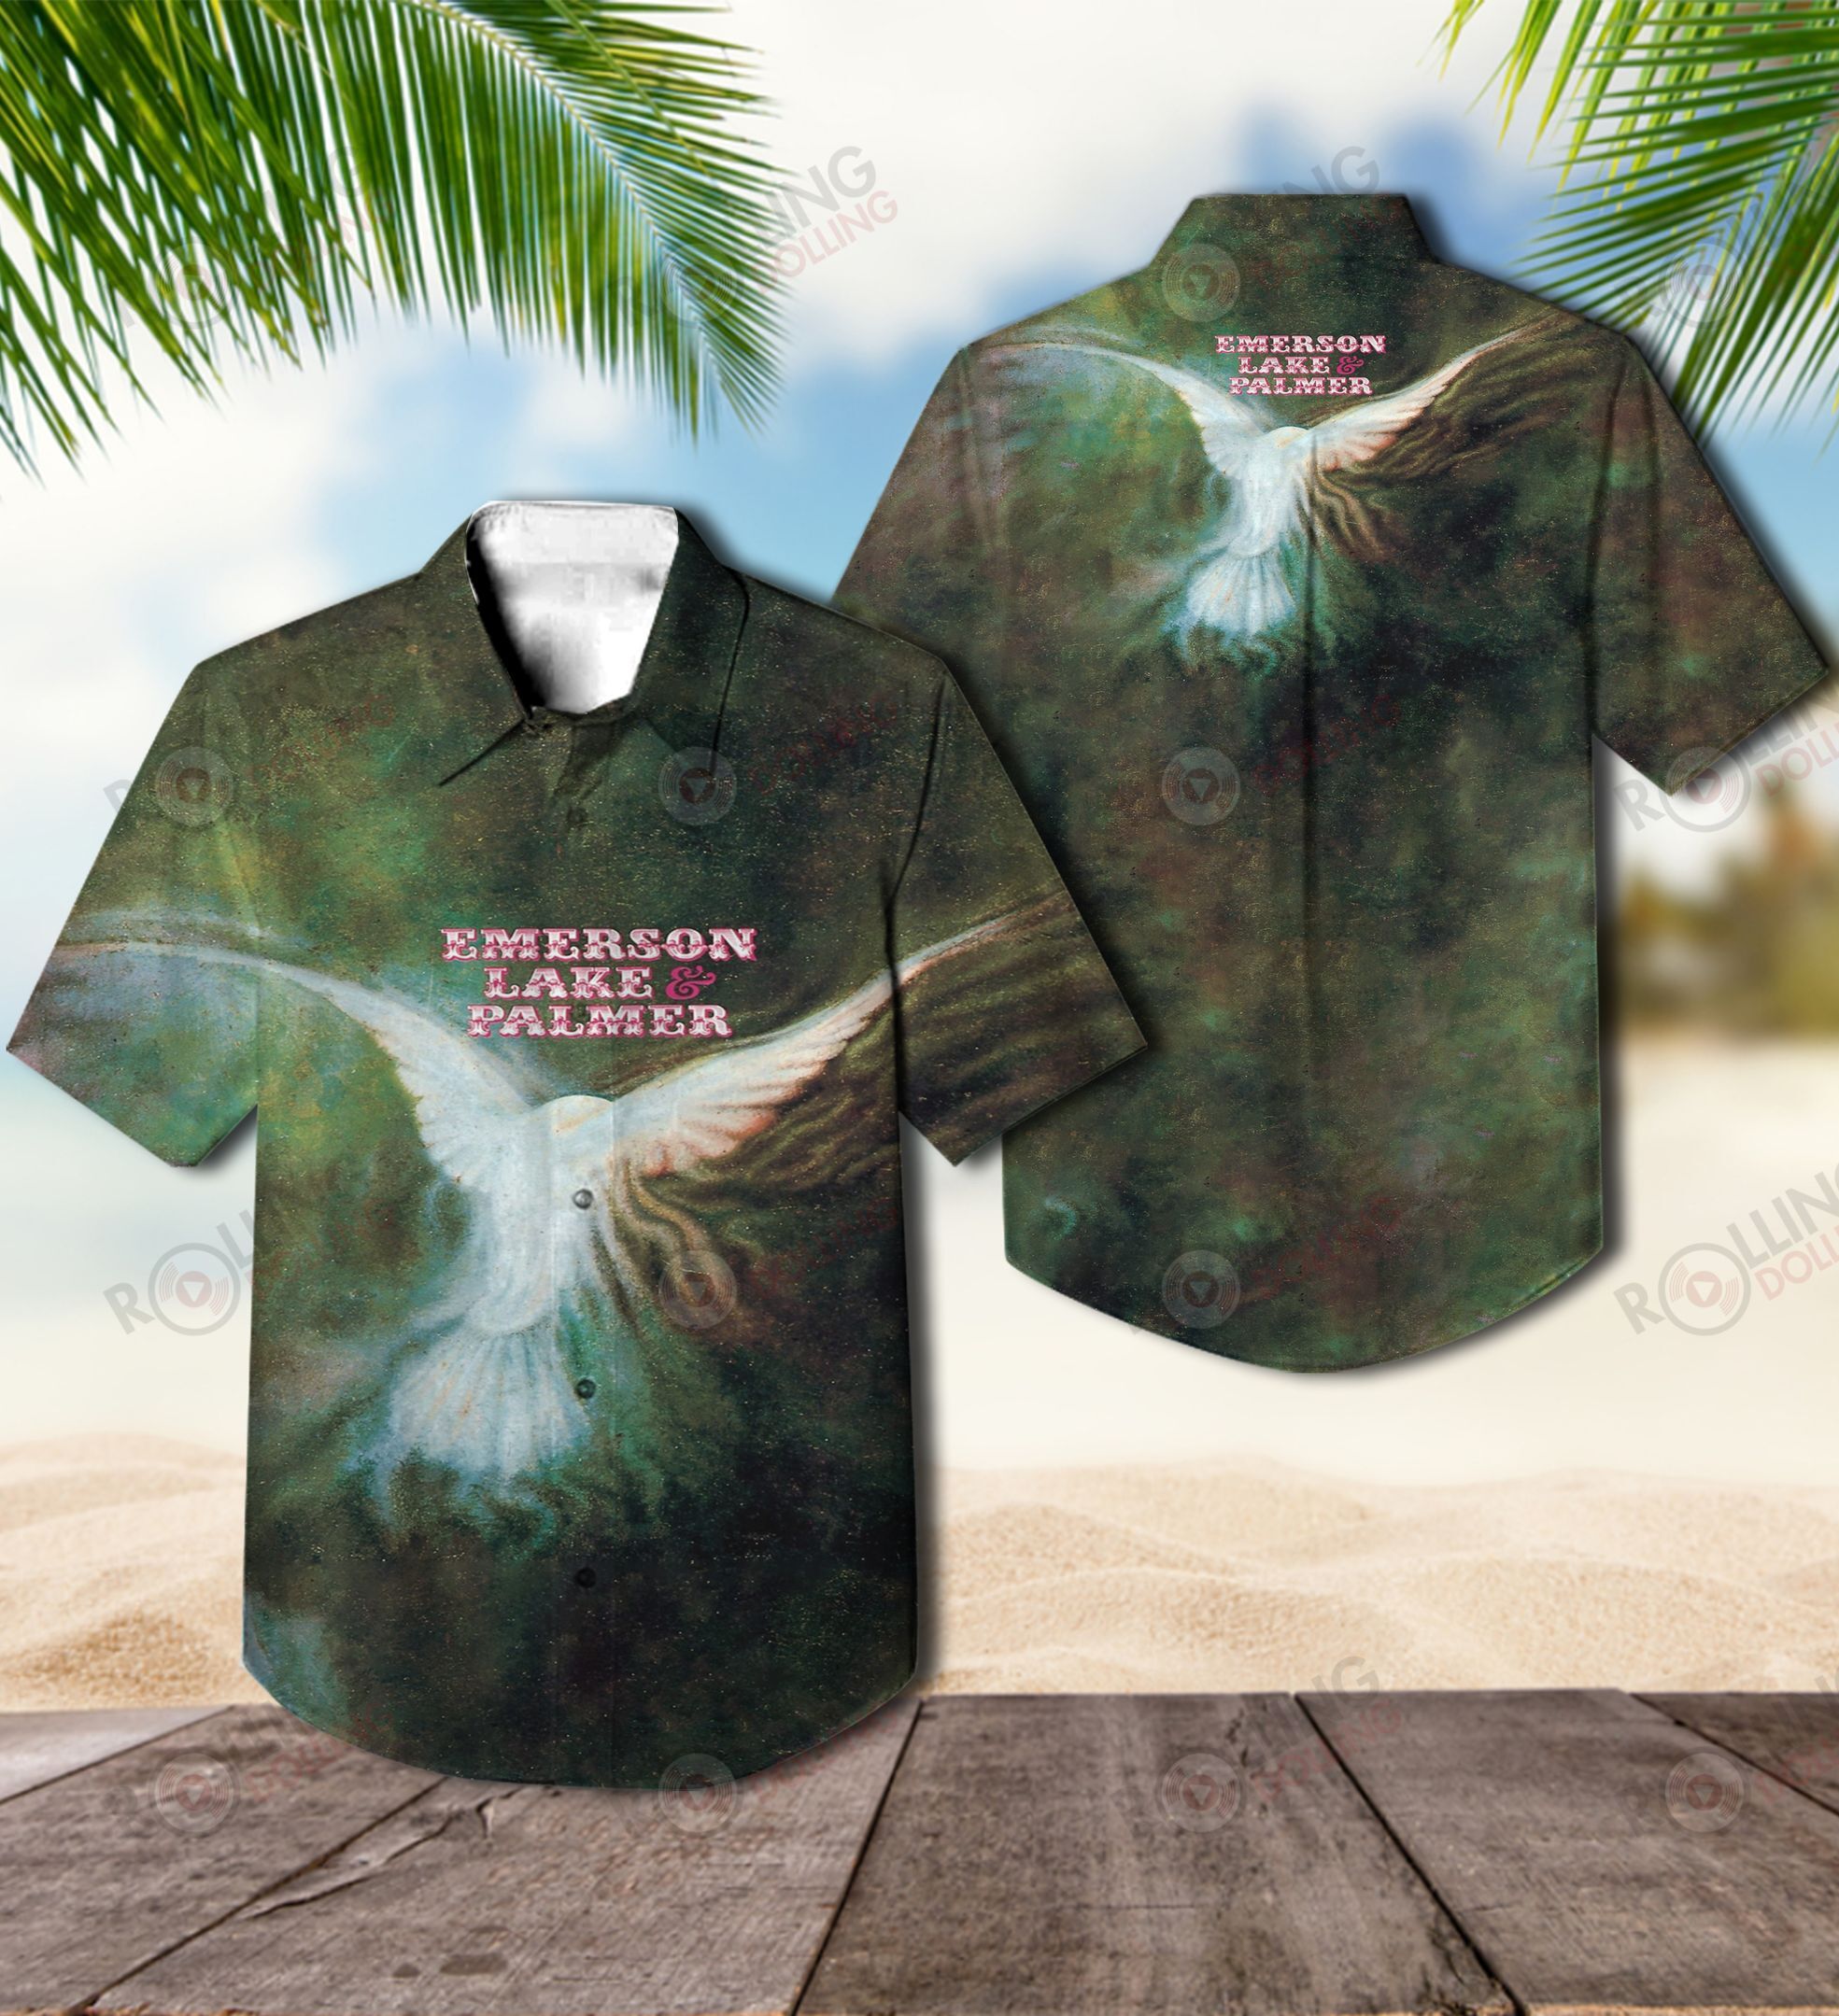 This would make a great gift for any fan who loves Hawaiian Shirt as well as Rock band 95